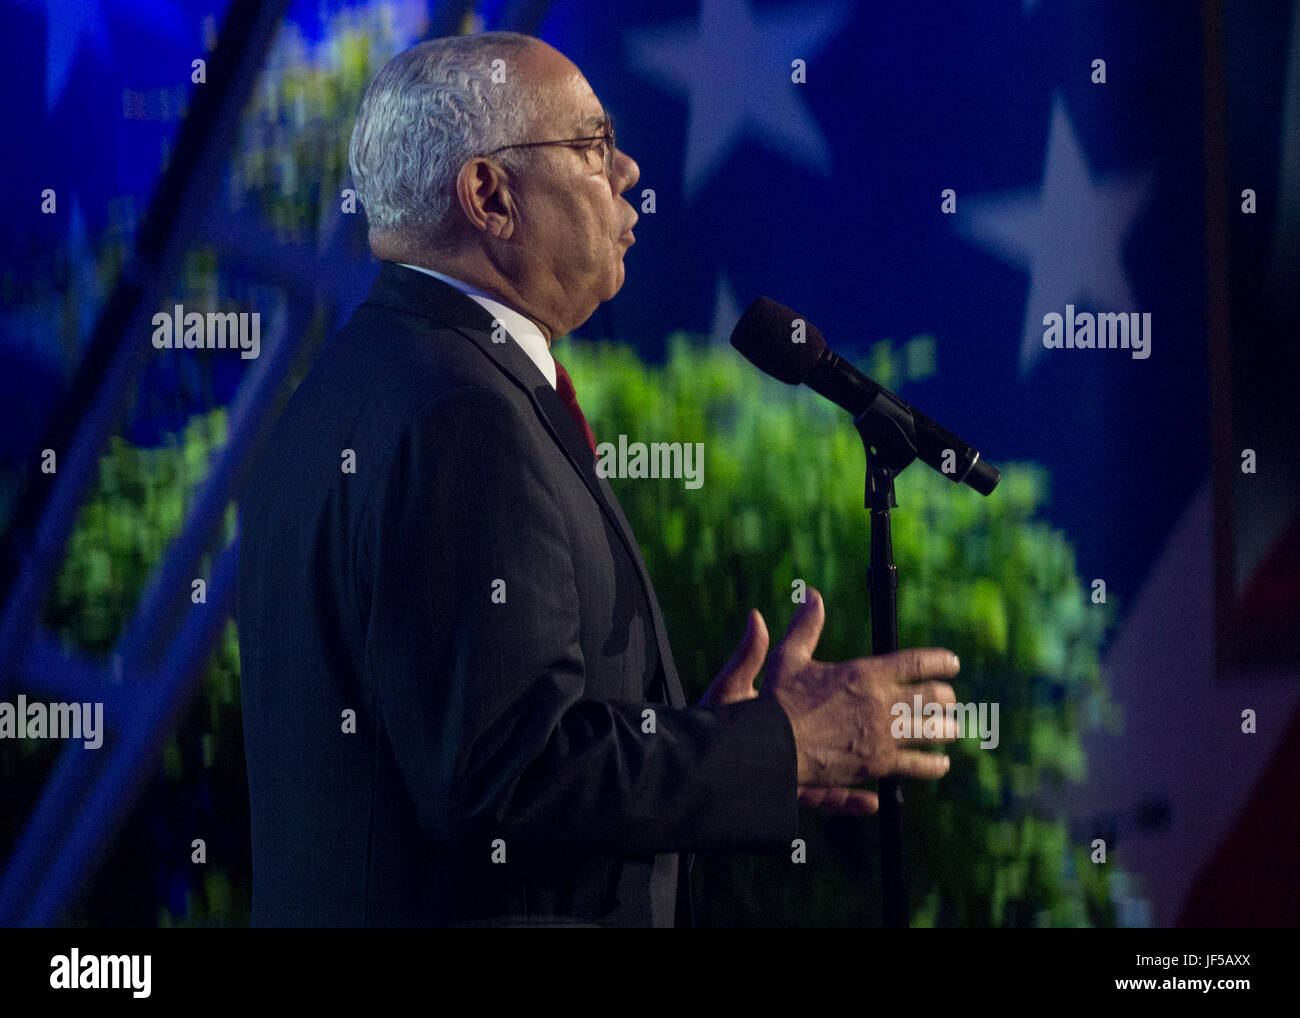 Army Gen.Colin L. Powell, (Ret.) delivers remarks at the National Memorial Day Concert at the west lawn of the U.S. Capitol, Washington, D.C., May 28, 2017. The concert’s mission is to unite the country in remembrance and appreciation of the fallen and to serve those who are grieving. (Dept. of Defense photo by Navy Petty Officer 2nd Class Dominique A. Pineiro/Released) Stock Photo